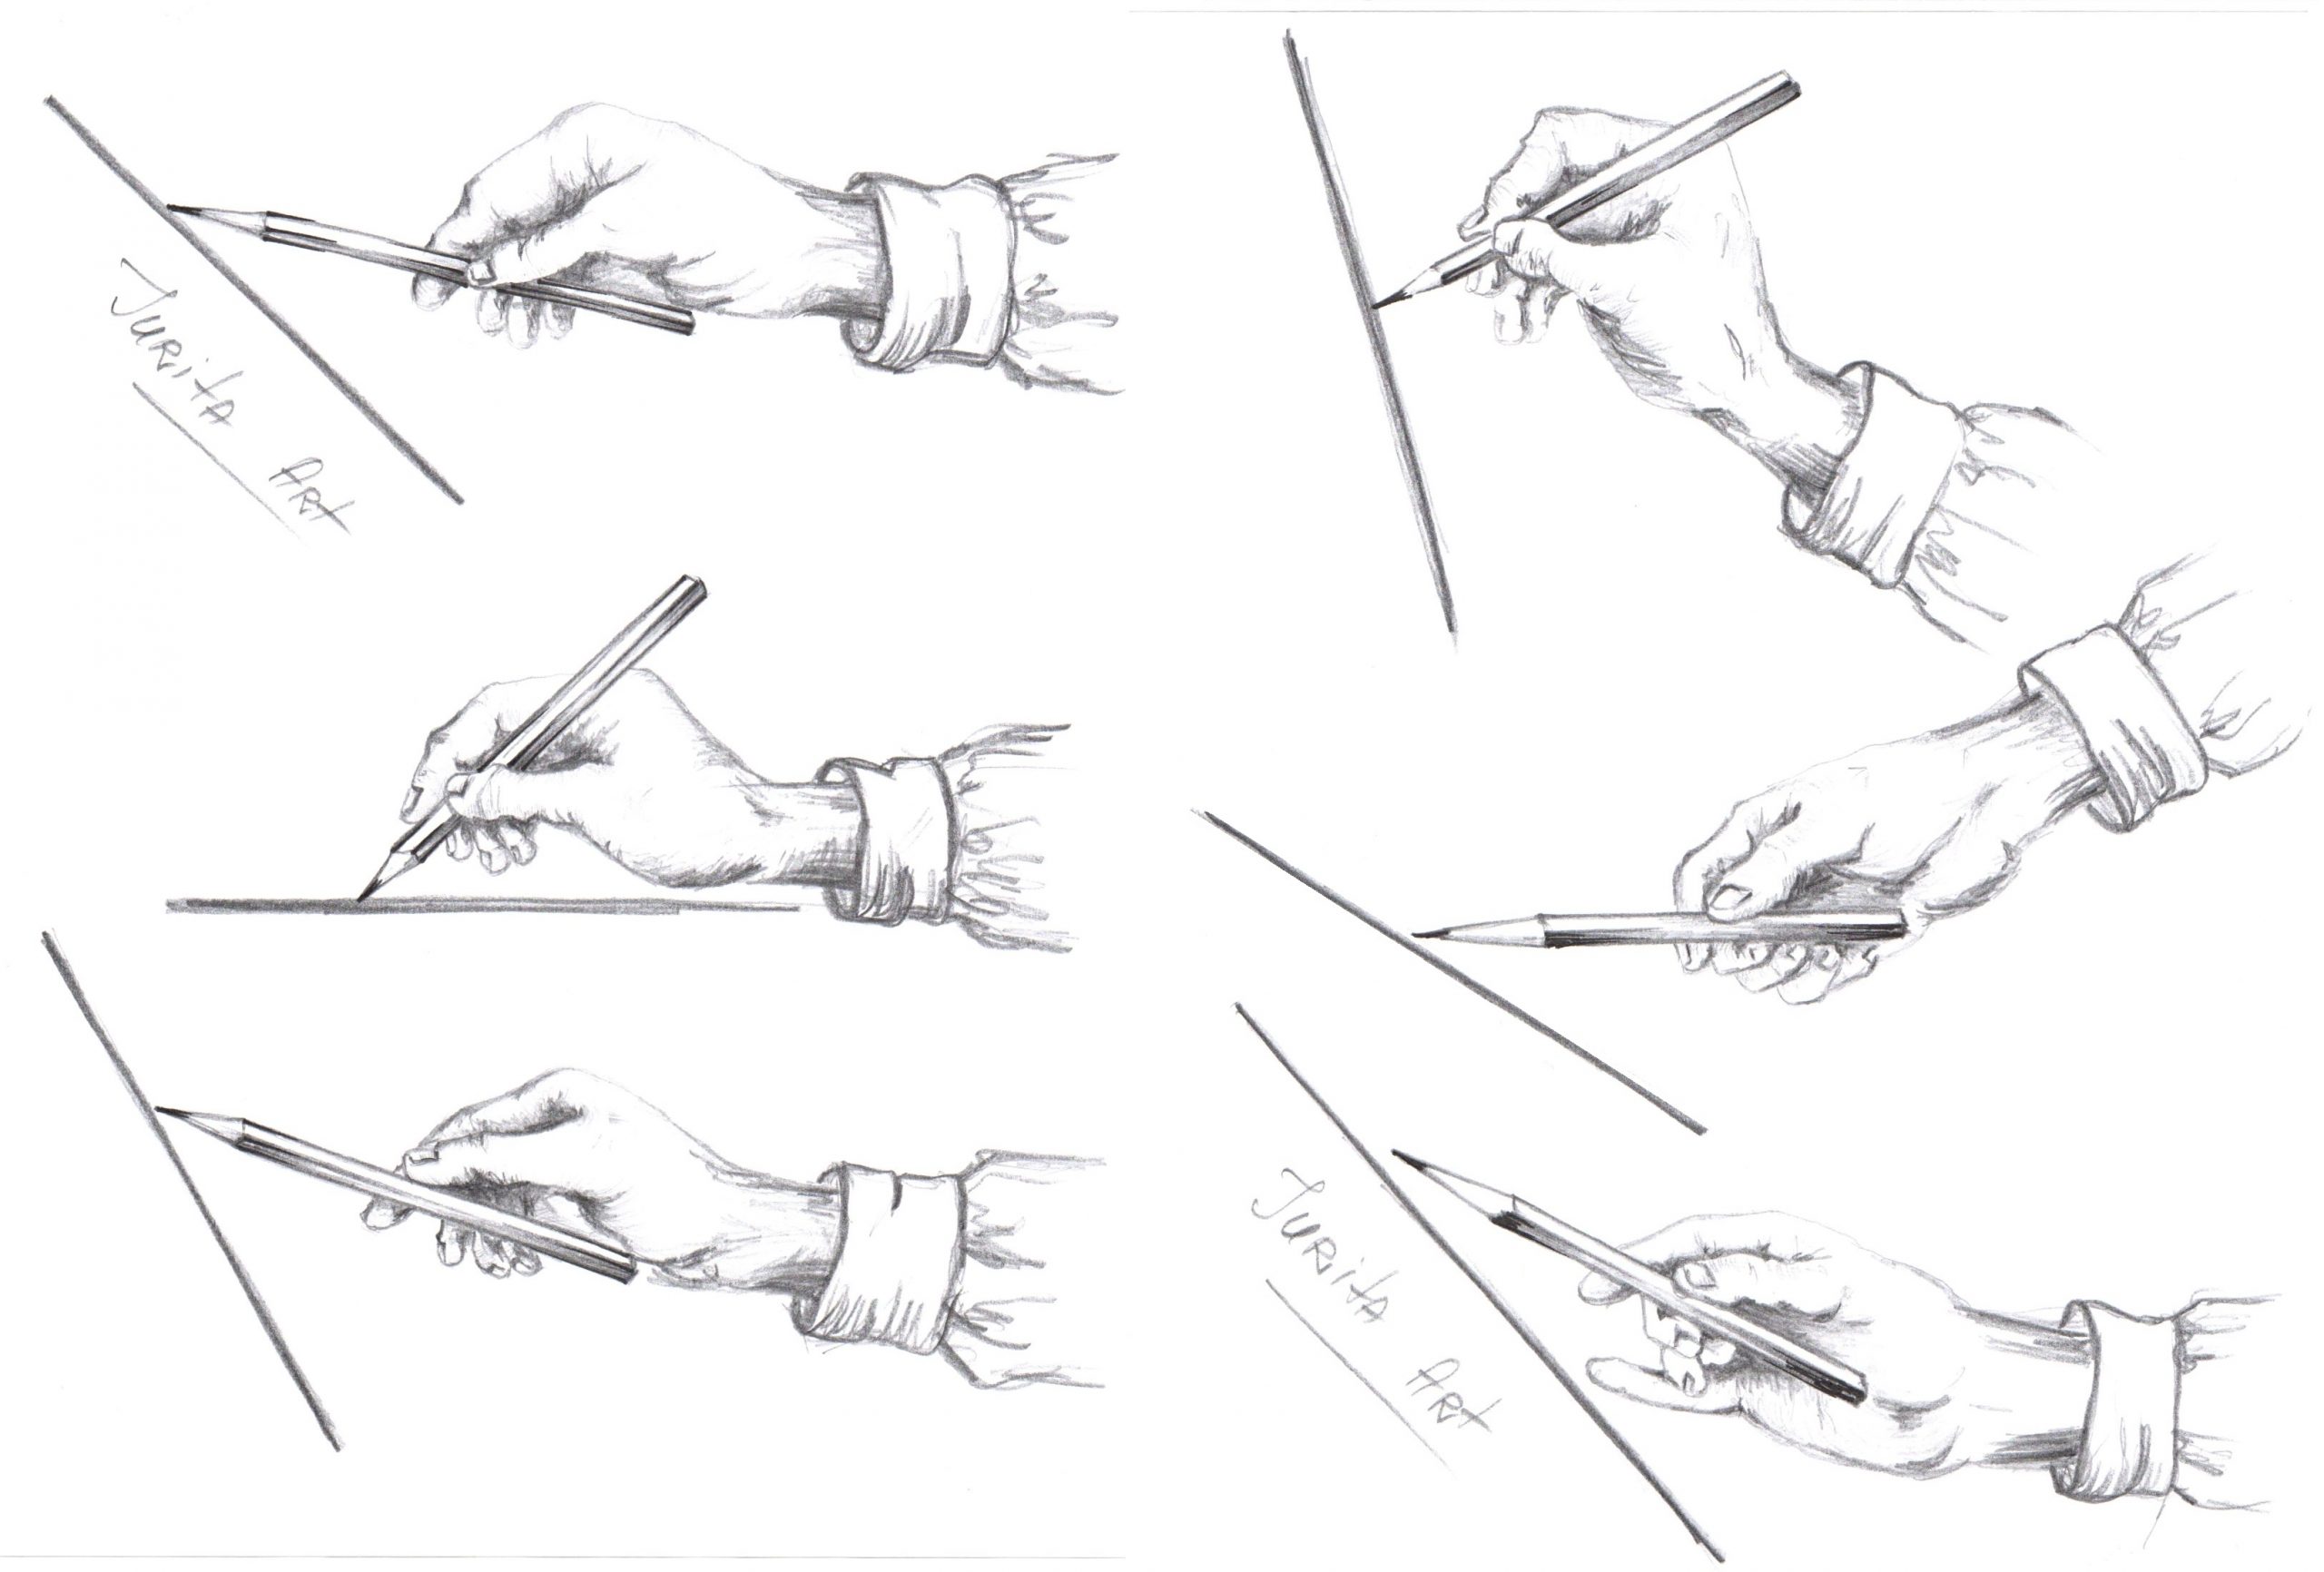 Basic Drawing Technique - How To Sharpen A Drawing Pencil 